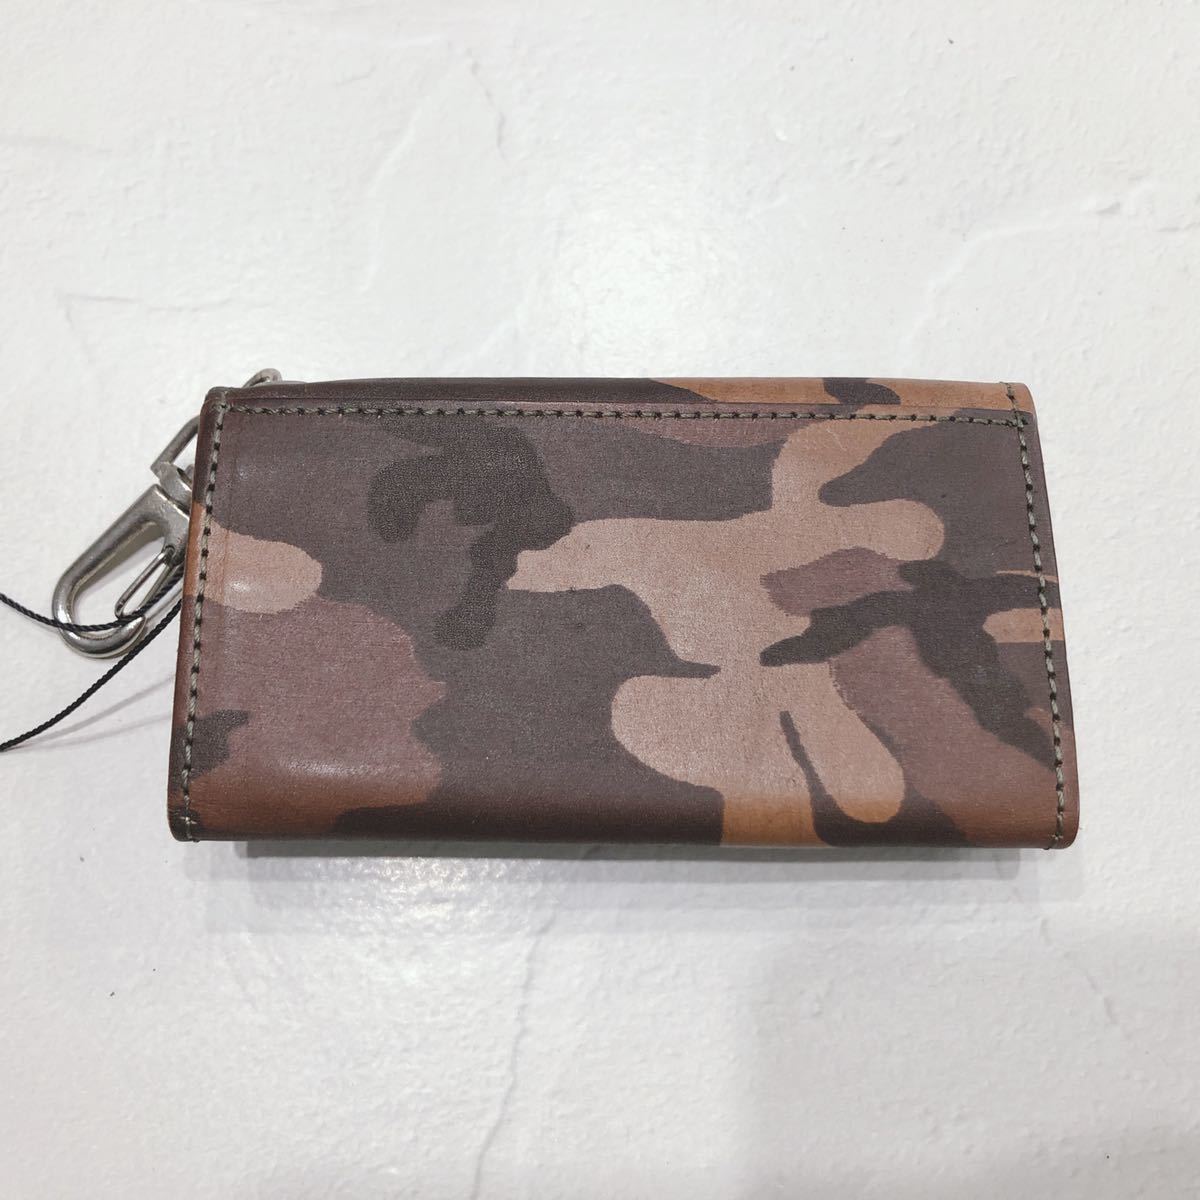 * new goods unused * DIESEL diesel key case 6 ream camouflage pattern camouflage pattern Brown beige leather key holder tag attaching men's free shipping 